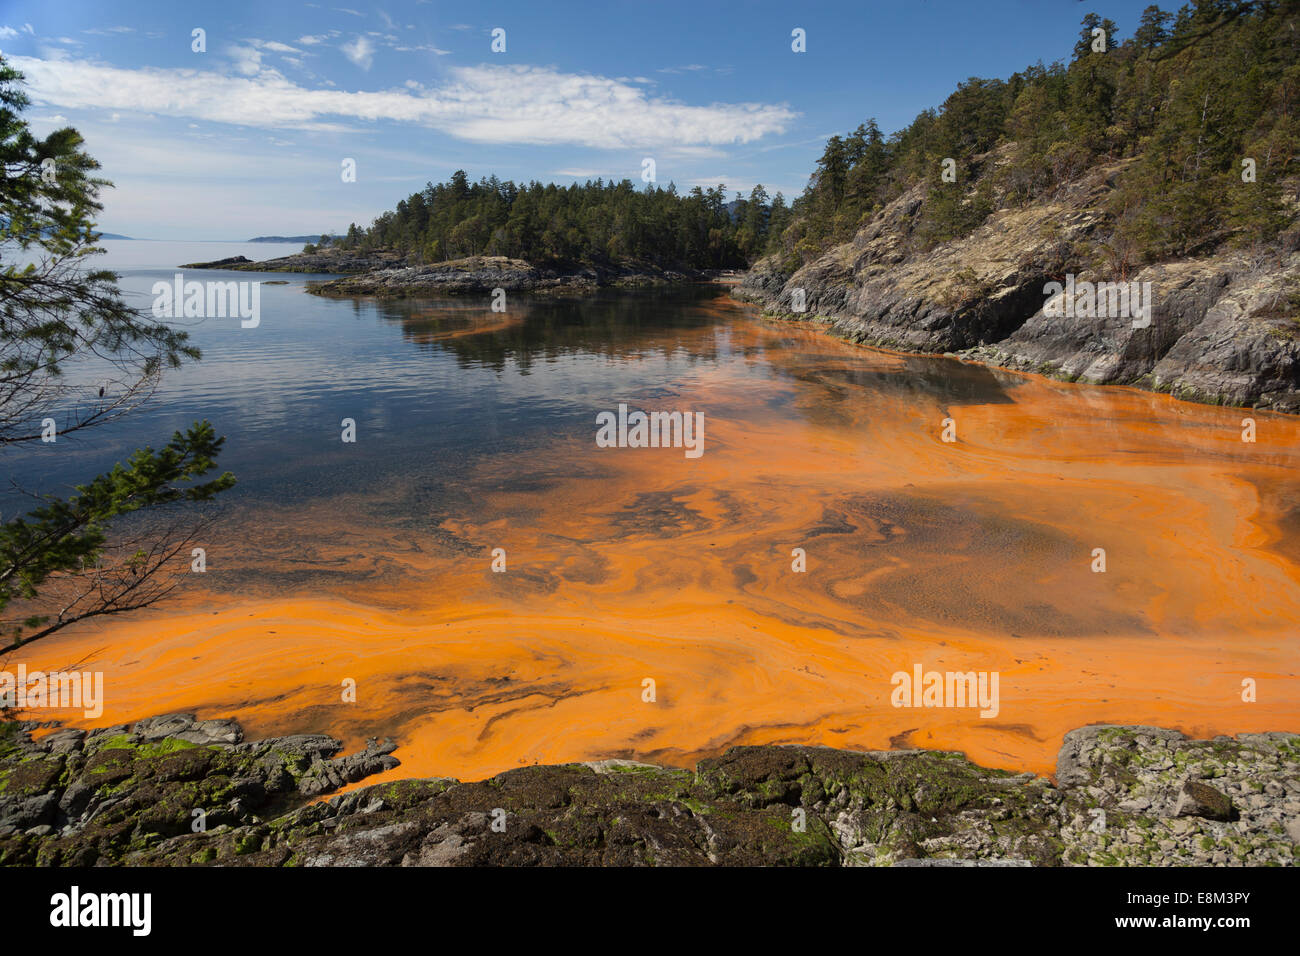 Algal bloom on the ocean. At Sechelt In British Columbia on Canada's west coast a concentration of algae makes the water orange. Stock Photo